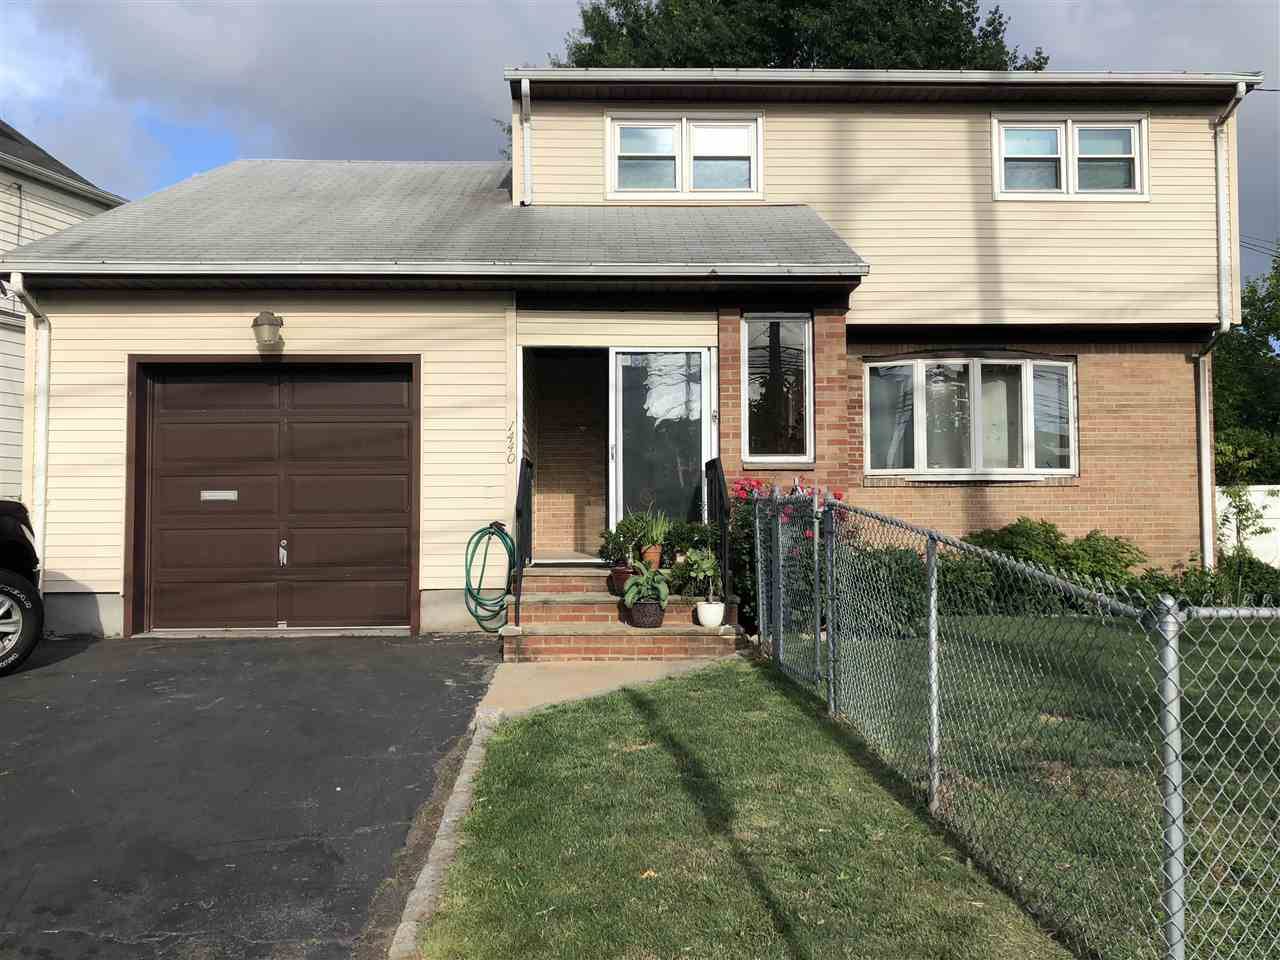 WELCOME TO 1440 PATERSON PLANK RD - 4 BR New Jersey